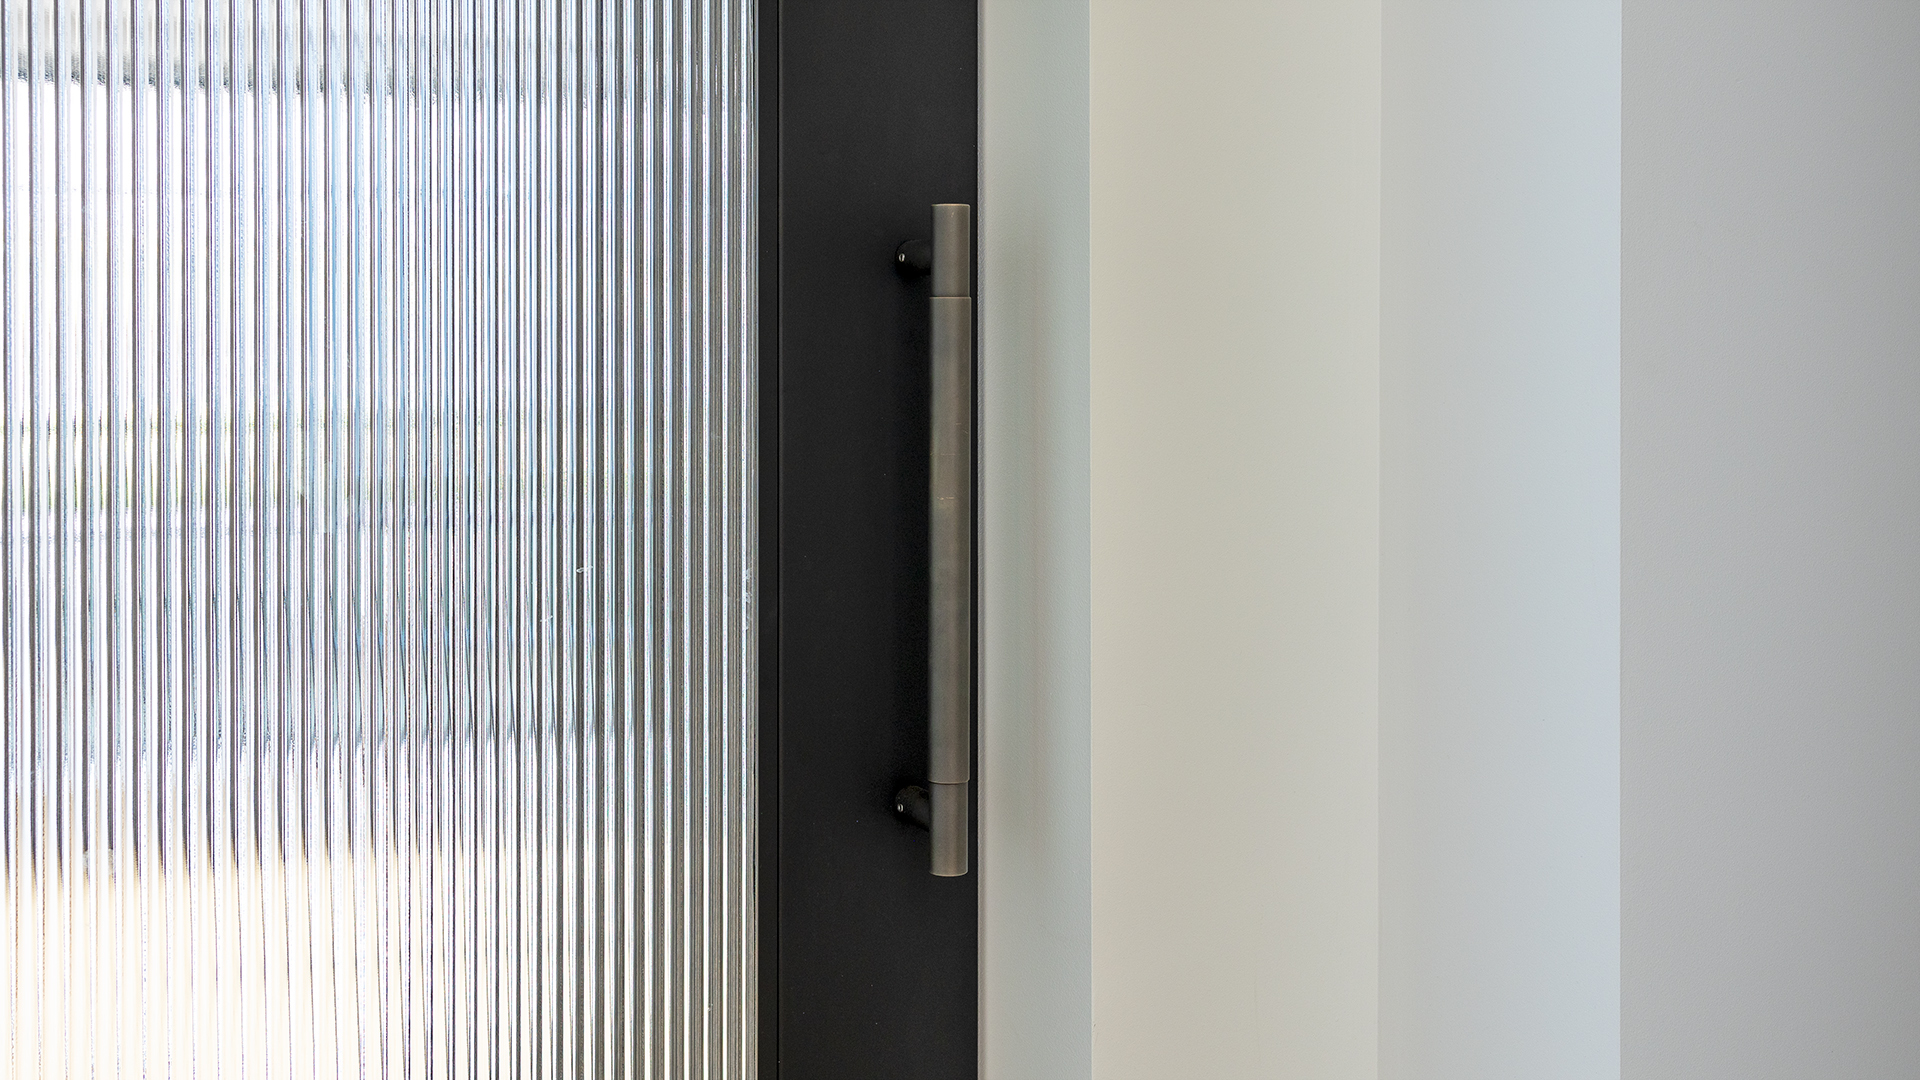 WAH NIDONZ Made Verge GN Milford RB Grant St Fluted Steel Door Melbourne 1920x1080px